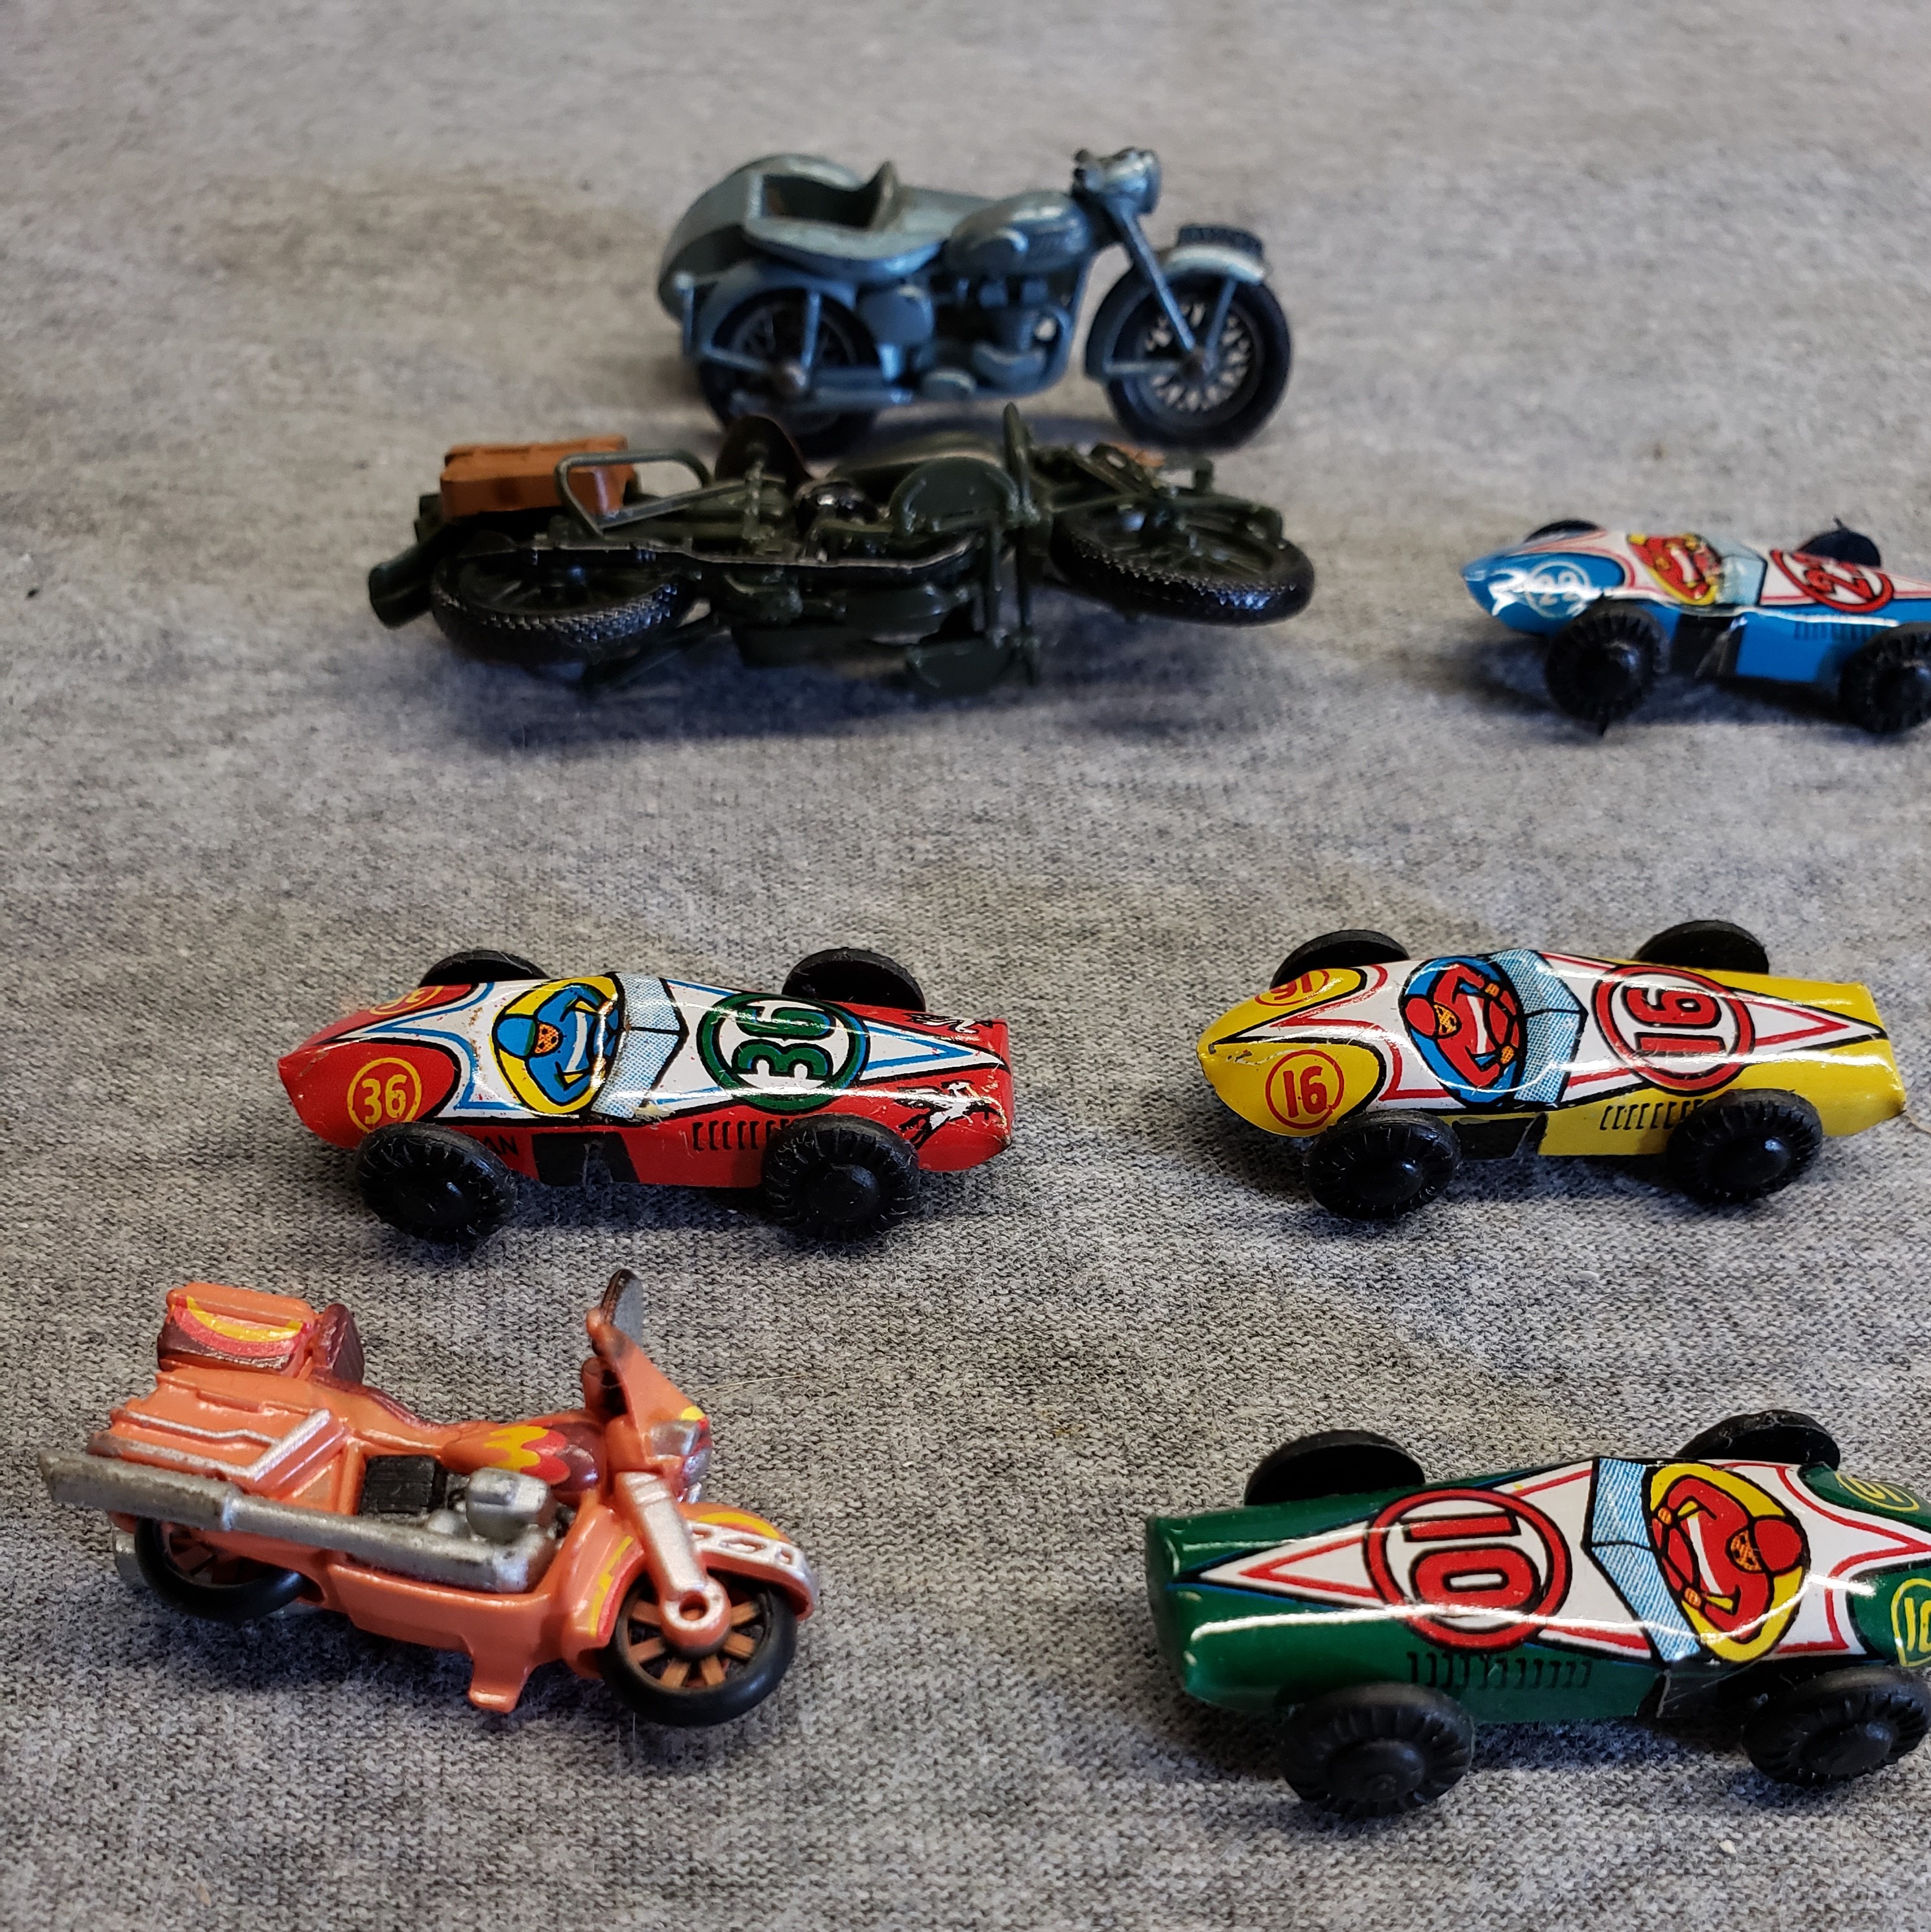 Matchbox Lesney No 4 Triumph Motorcycle w/ Sidecar and 6 other collectibles